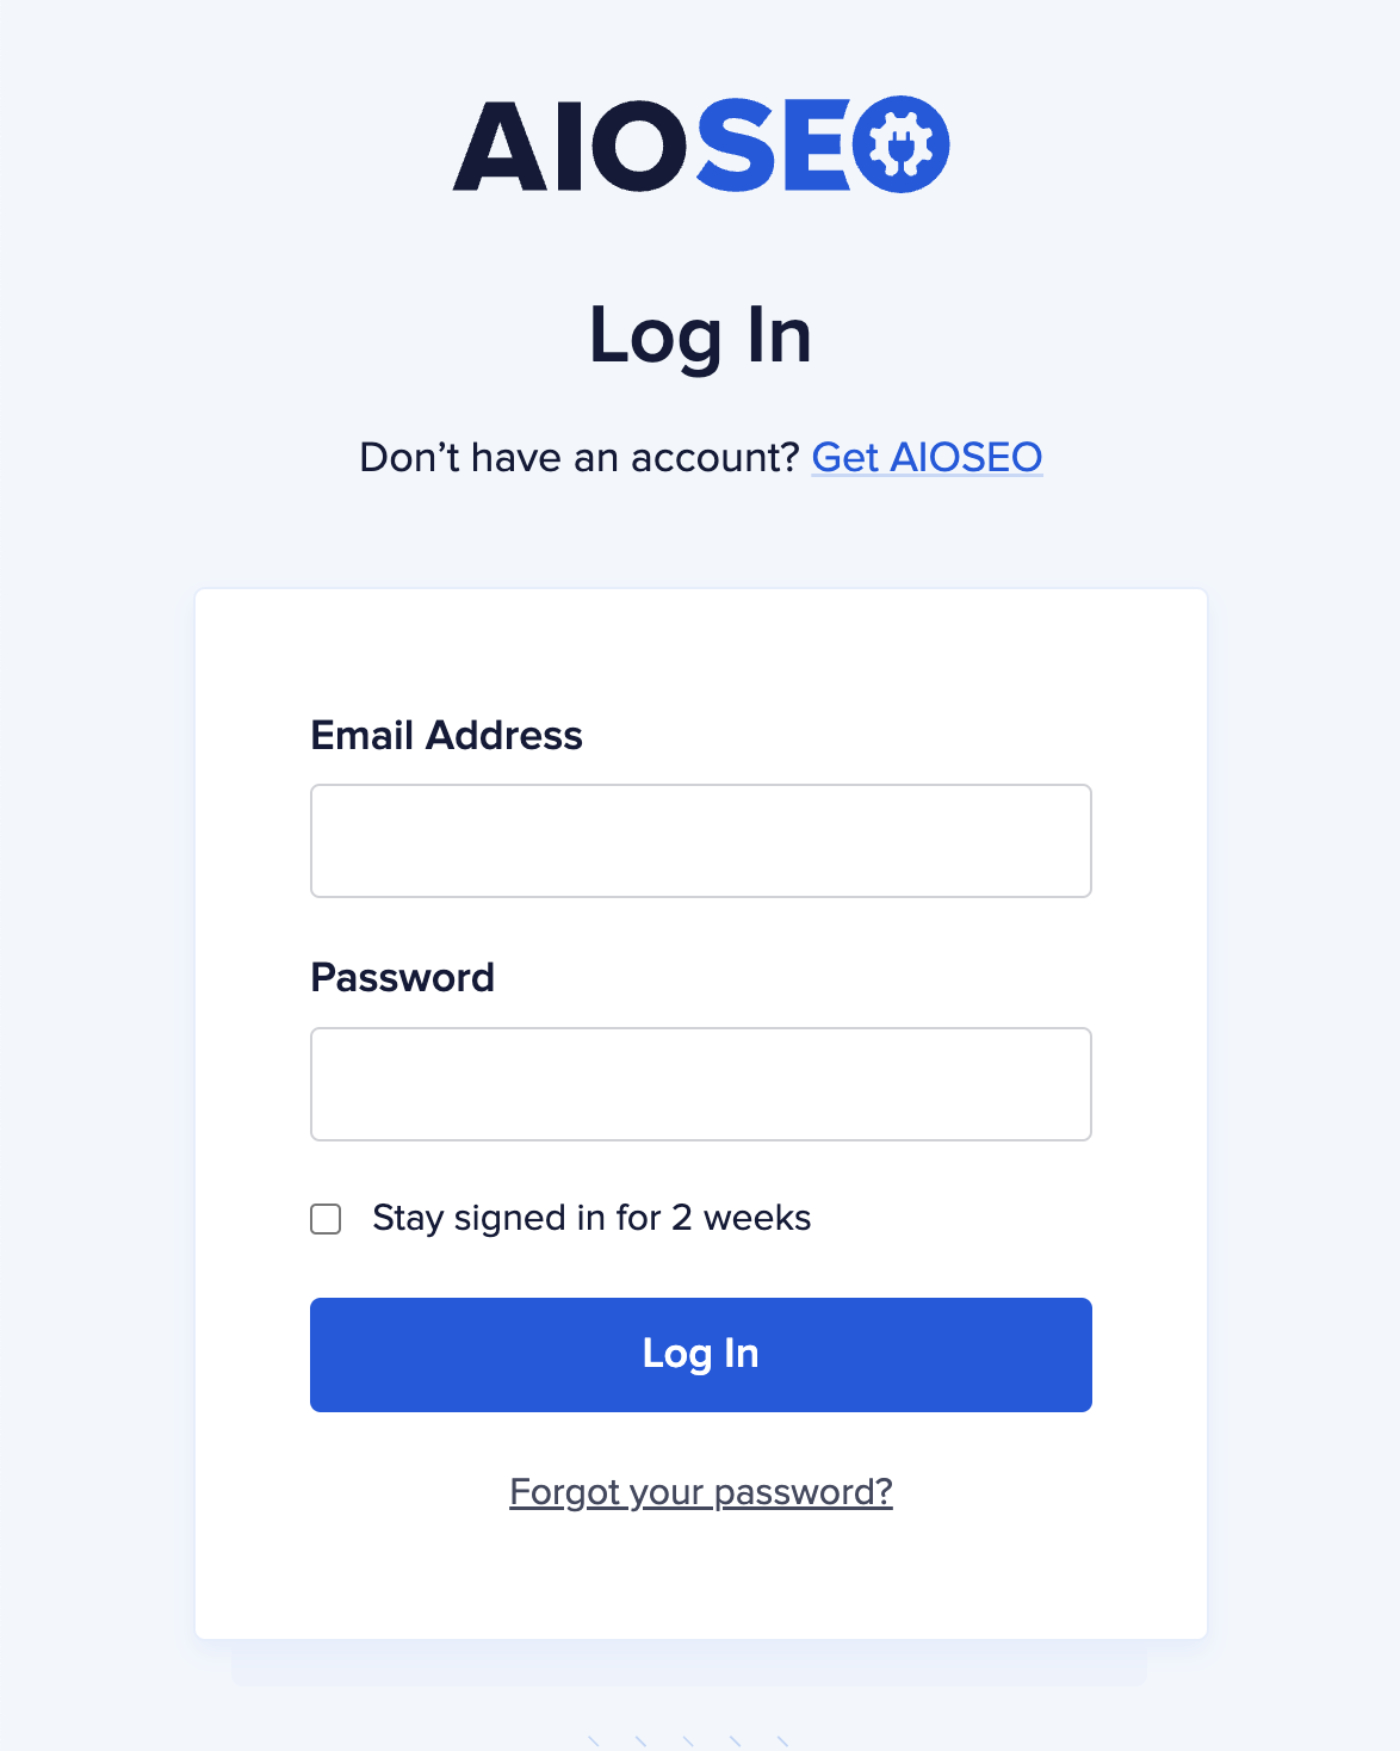 Login screen for aioseo.com showing the Email Address and Password fields